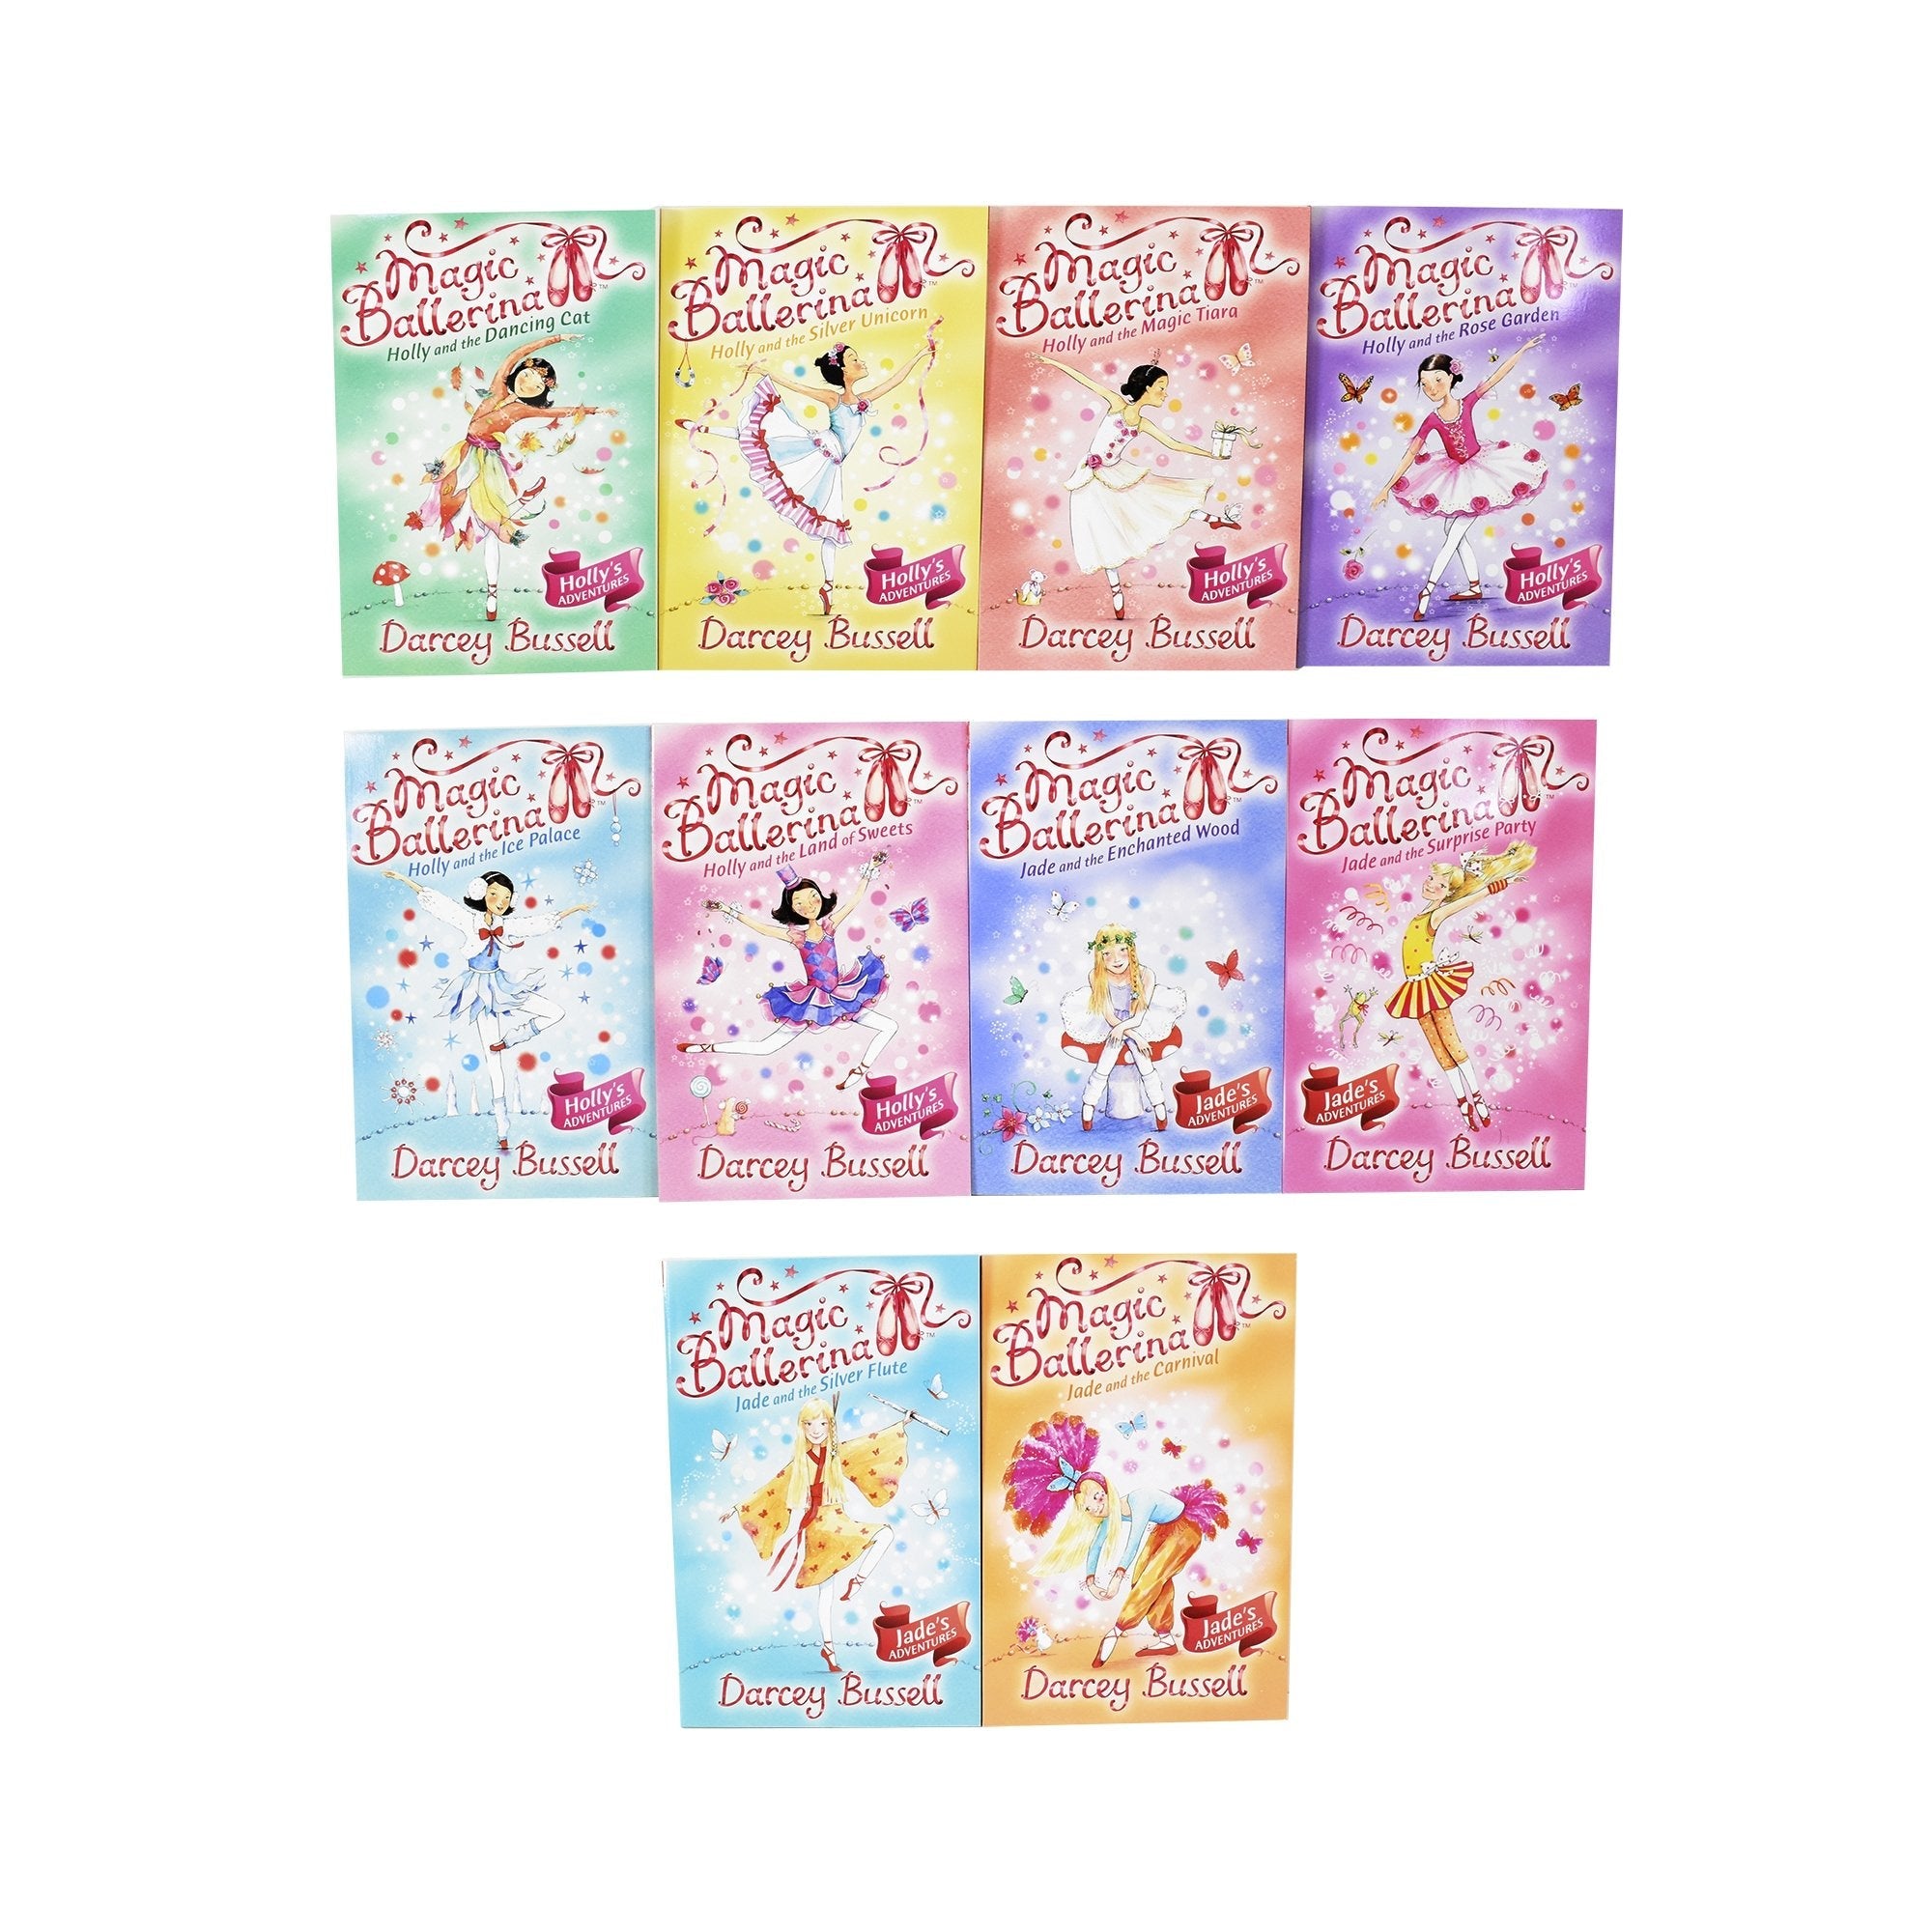 Magic Ballerina 22 Books Children Collection Paperback Set By Darcey Bussell - St Stephens Books